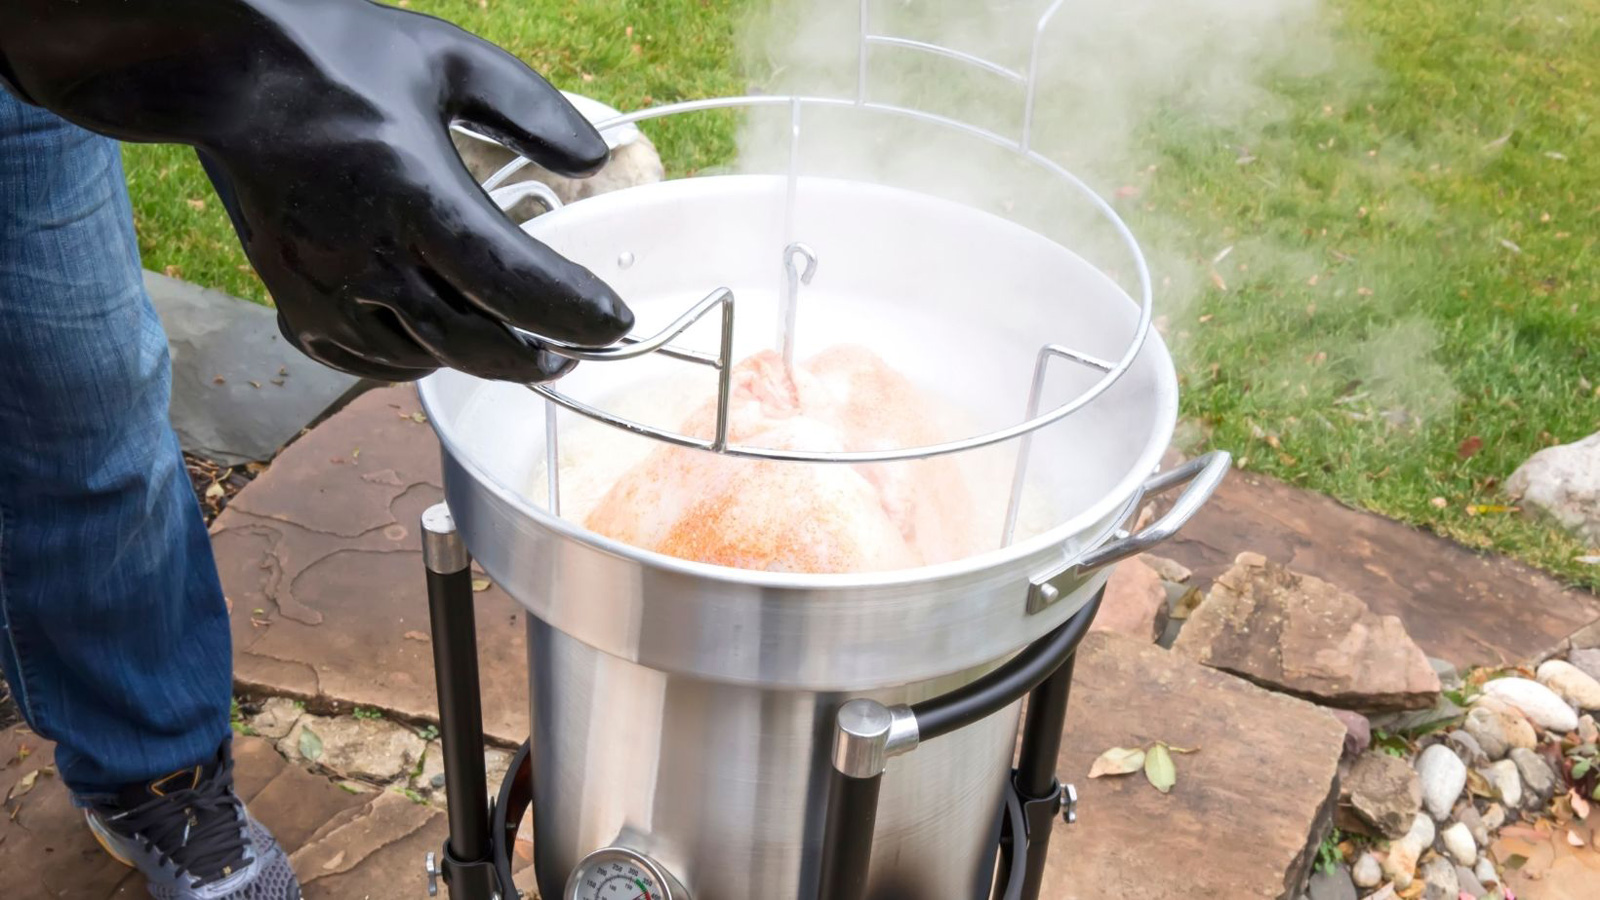 Turkey fryers increase risk of holiday fires